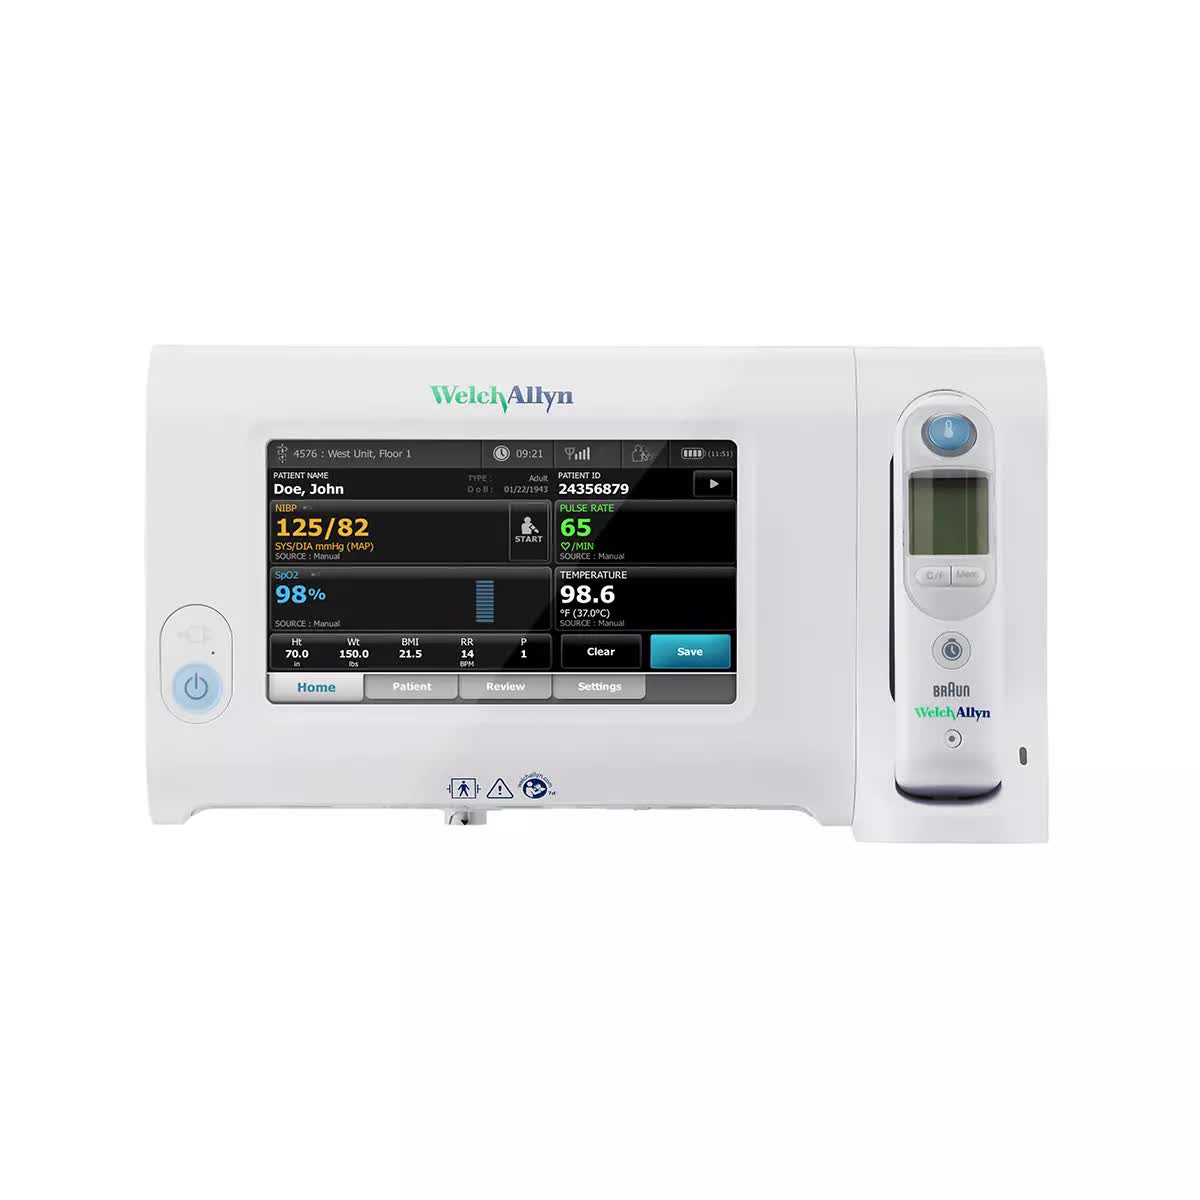 Welch Allyn Connex 7400 Upgradable to WIFI Connectivity Spot Monitor with Masimo SpO2, SureTemp Thermometer and Masimo Respiration Rate Technology